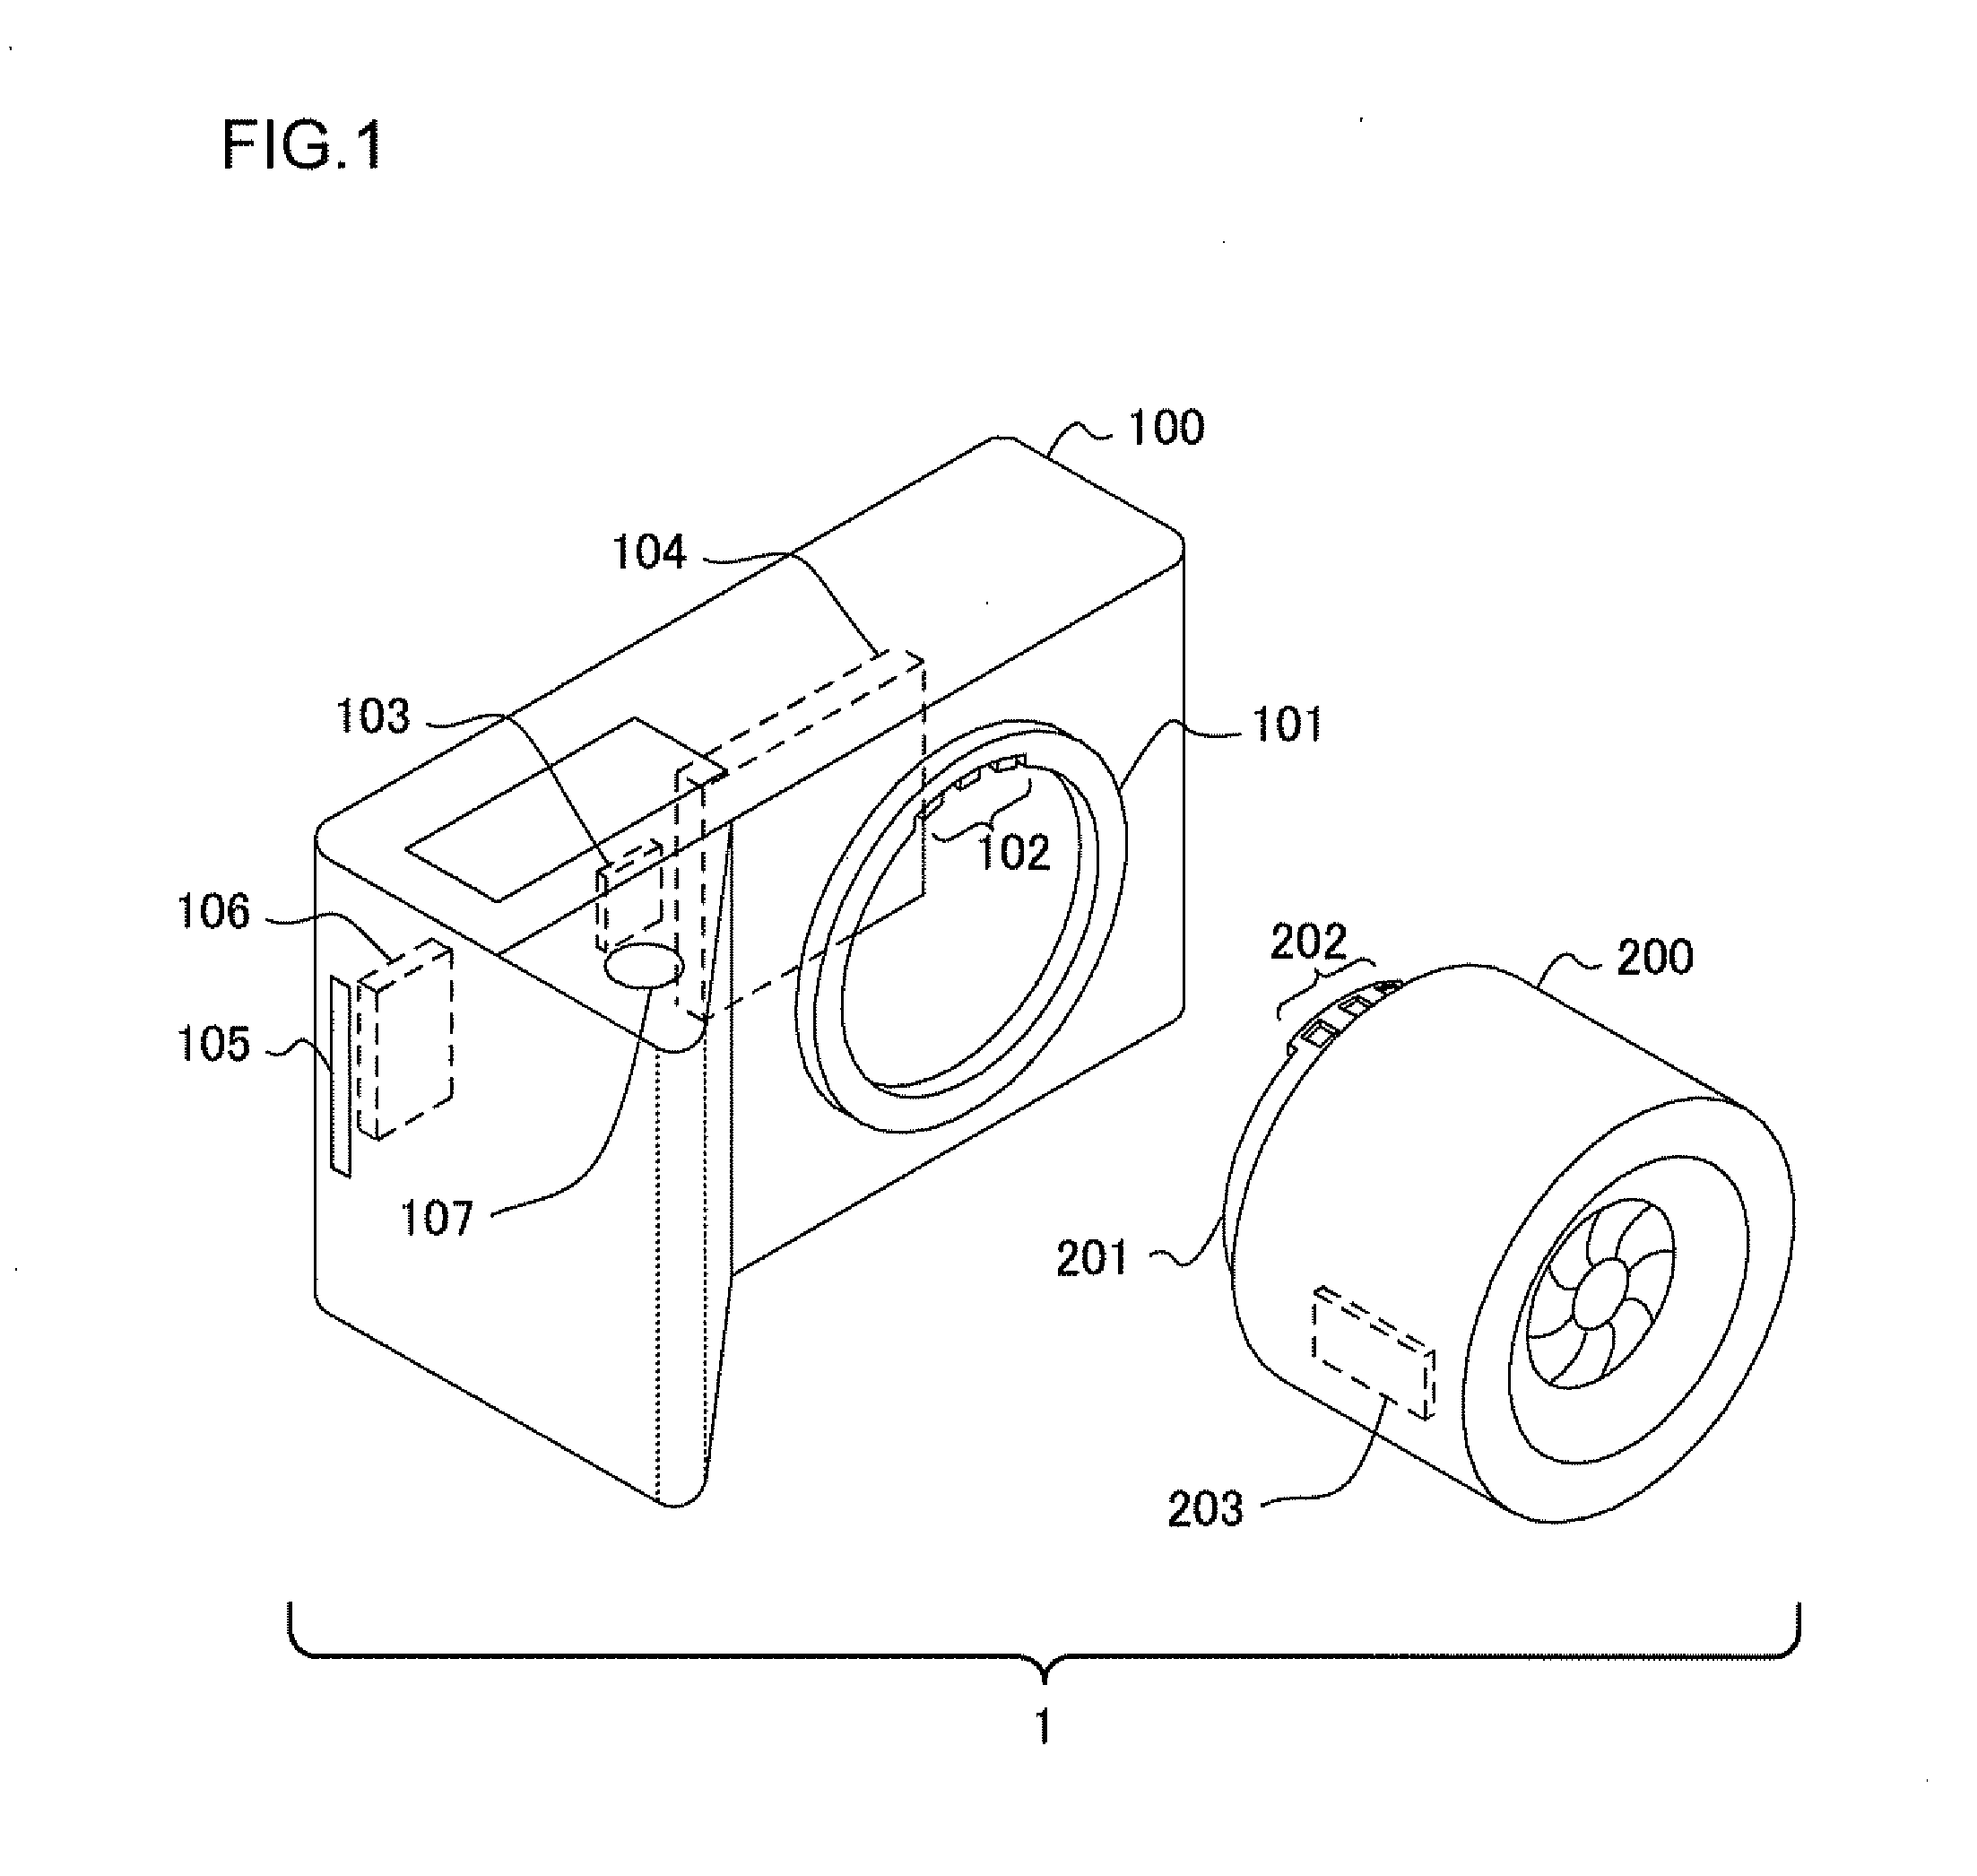 Interchangeable lens and camera body